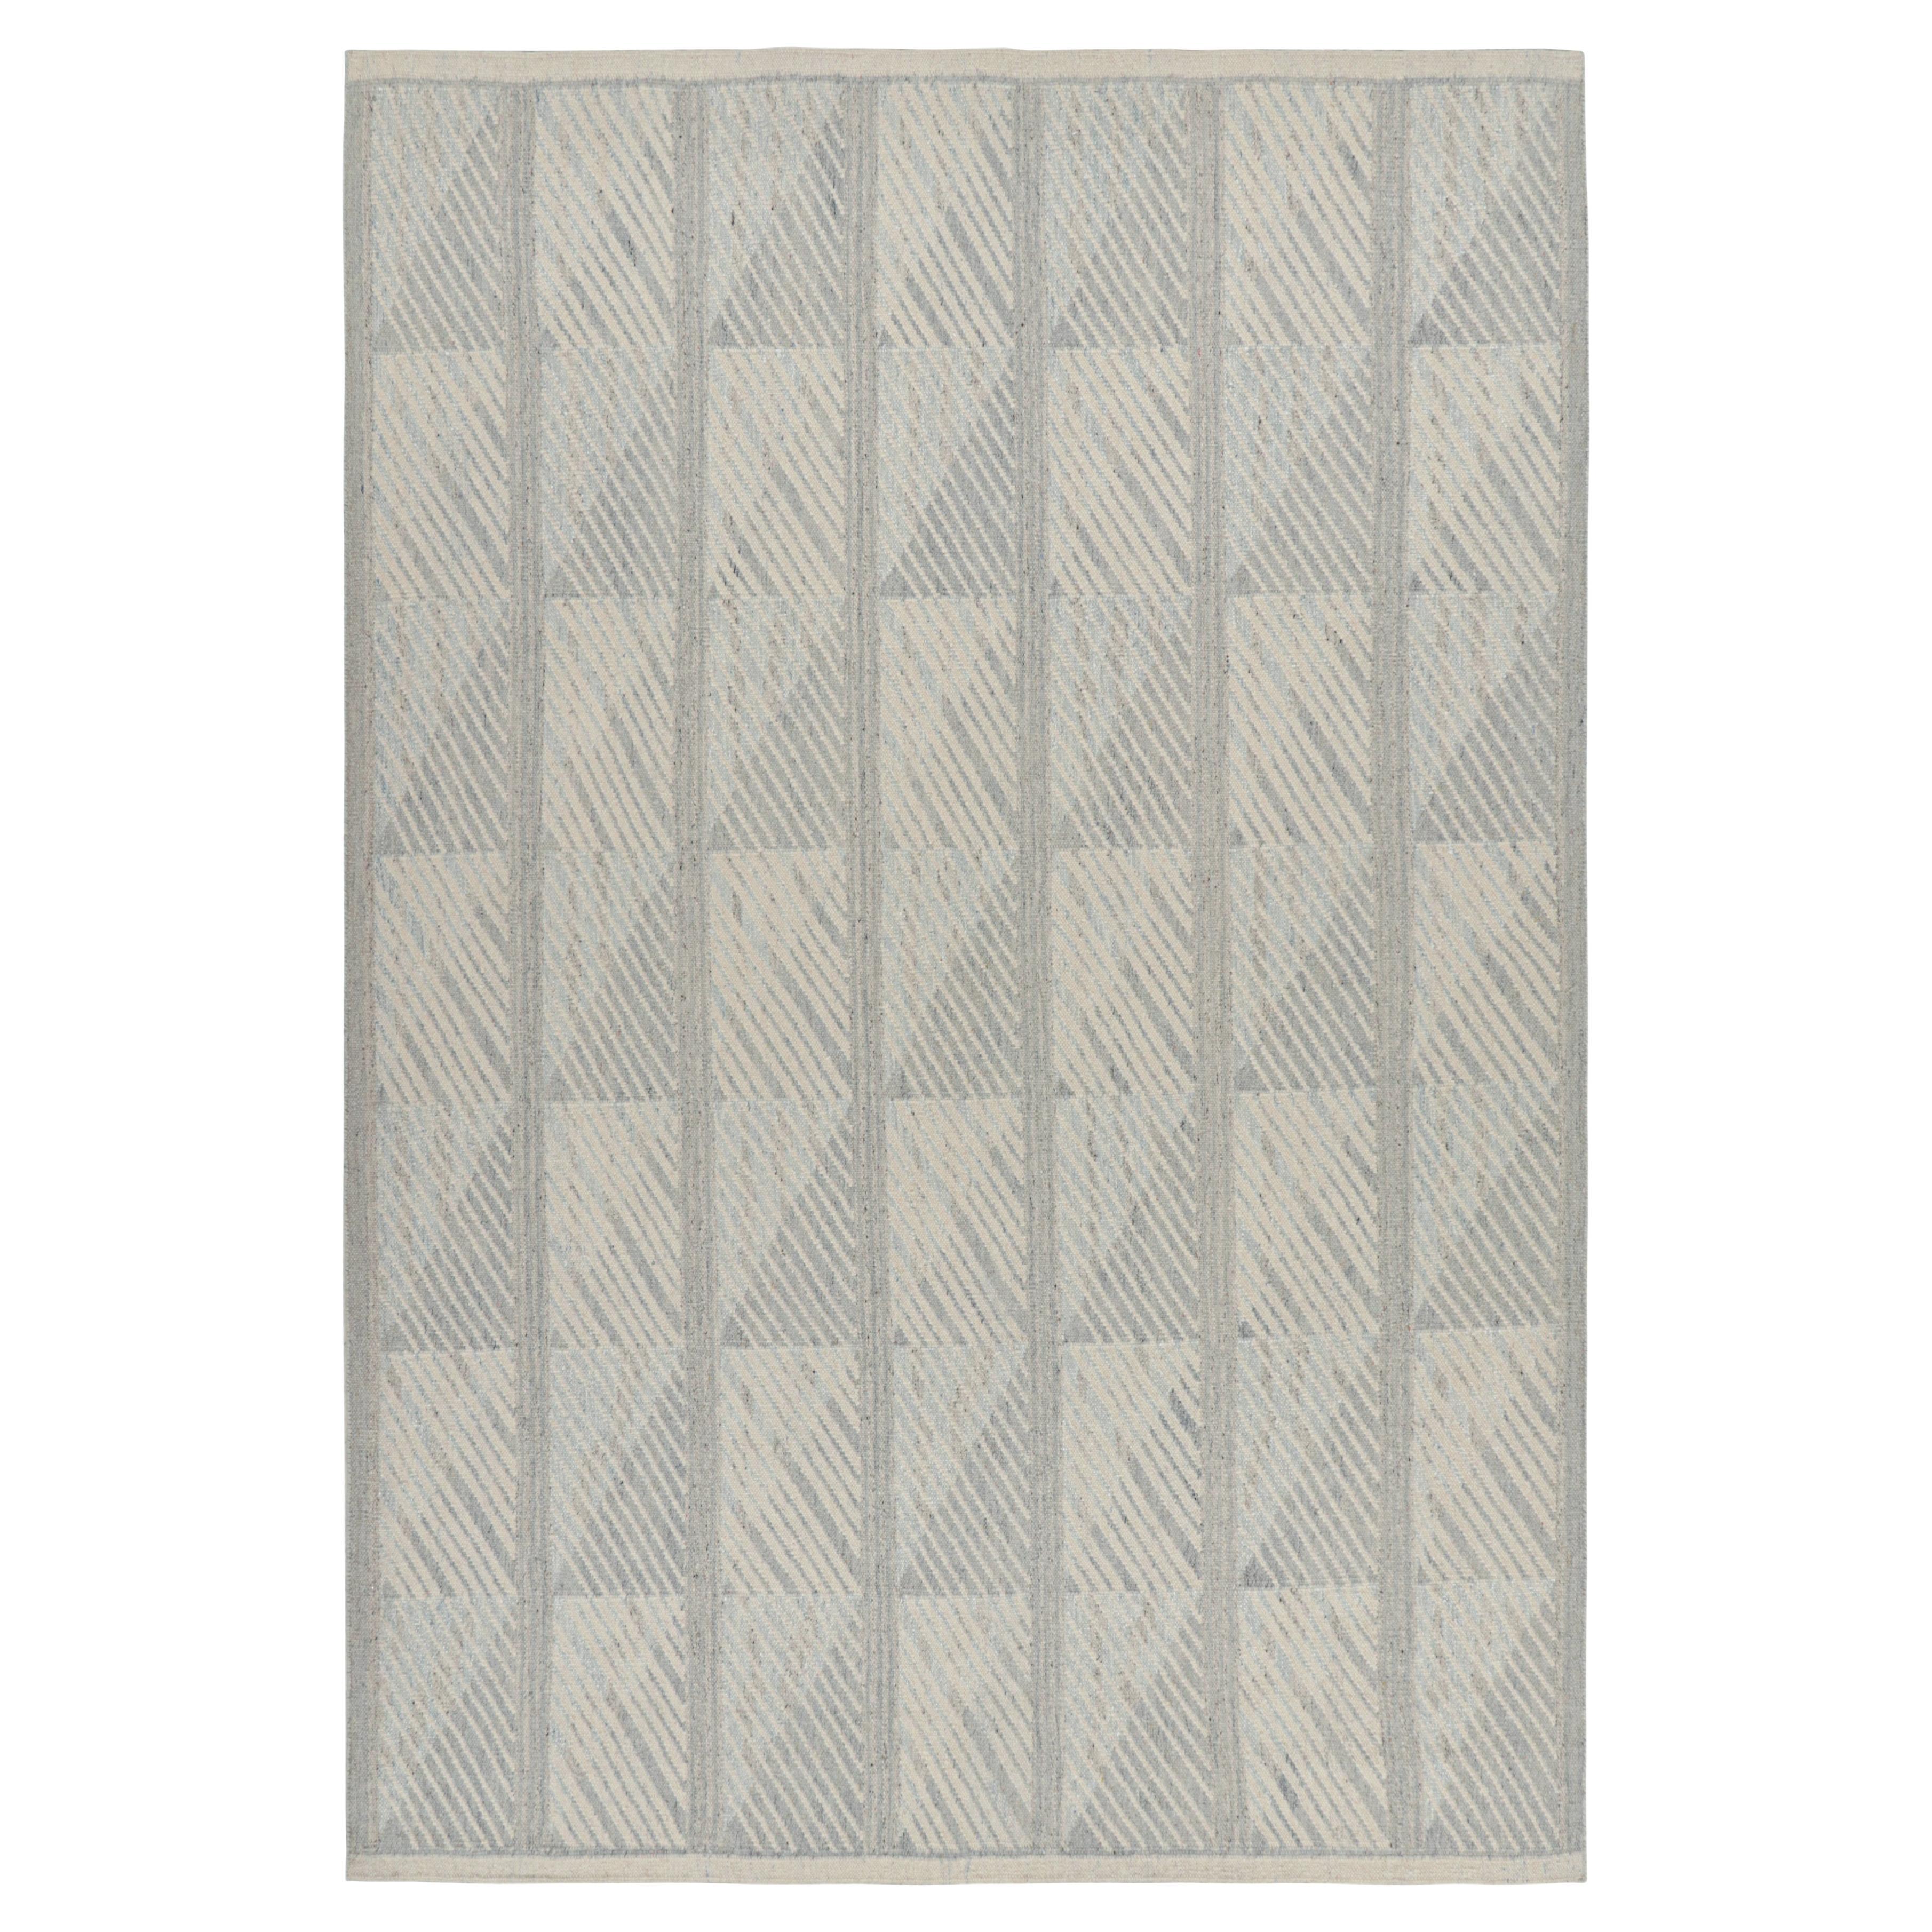 Rug & Kilim’s Scandinavian Style Rug in Blue and Gray Geometric Patterns